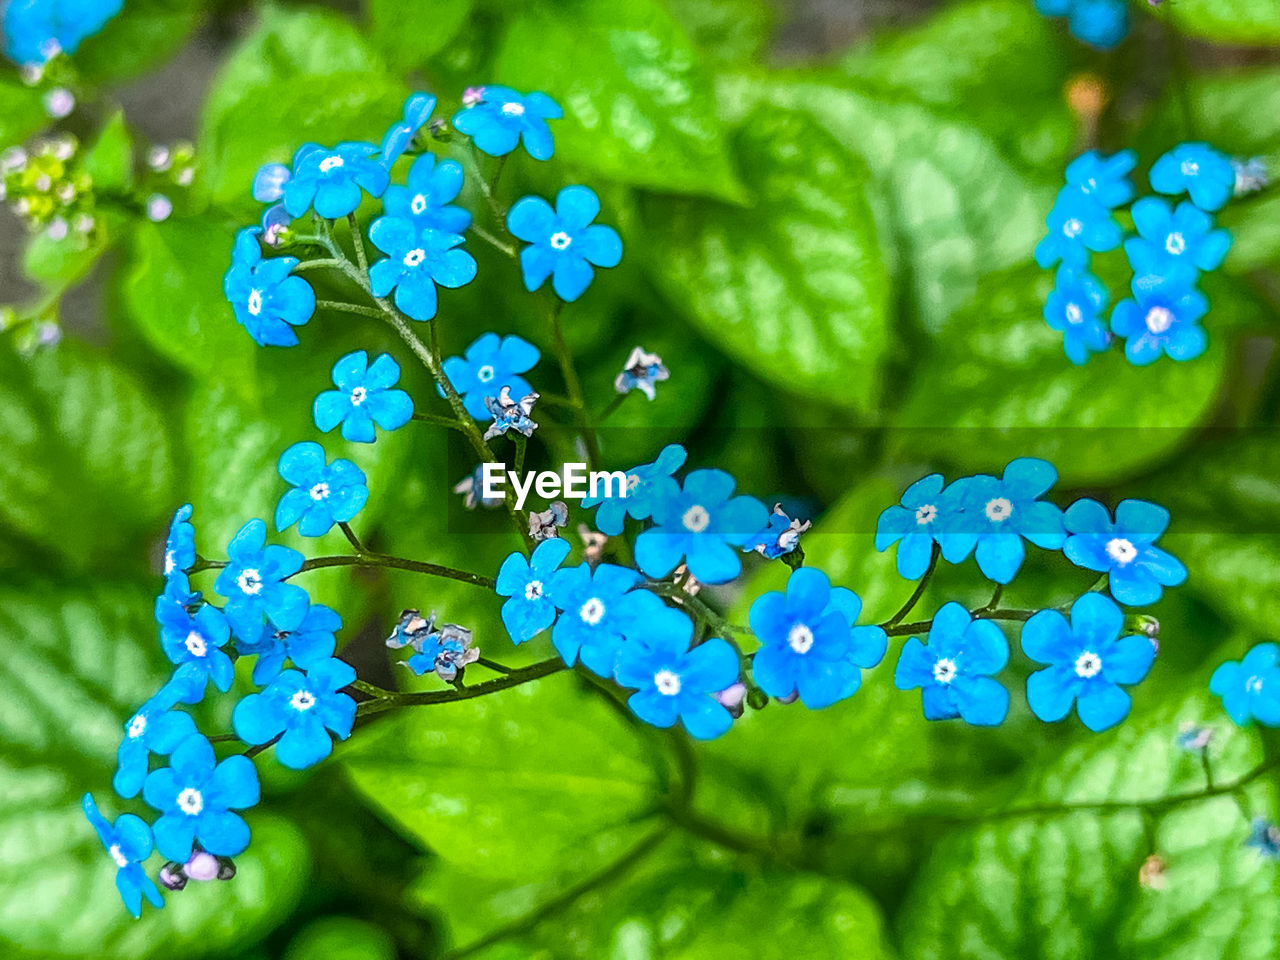 blue, plant, flower, nature, beauty in nature, forget-me-not, leaf, freshness, plant part, flowering plant, green, close-up, macro photography, growth, no people, outdoors, water, wildflower, environment, summer, day, fragility, food and drink, vibrant color, drop